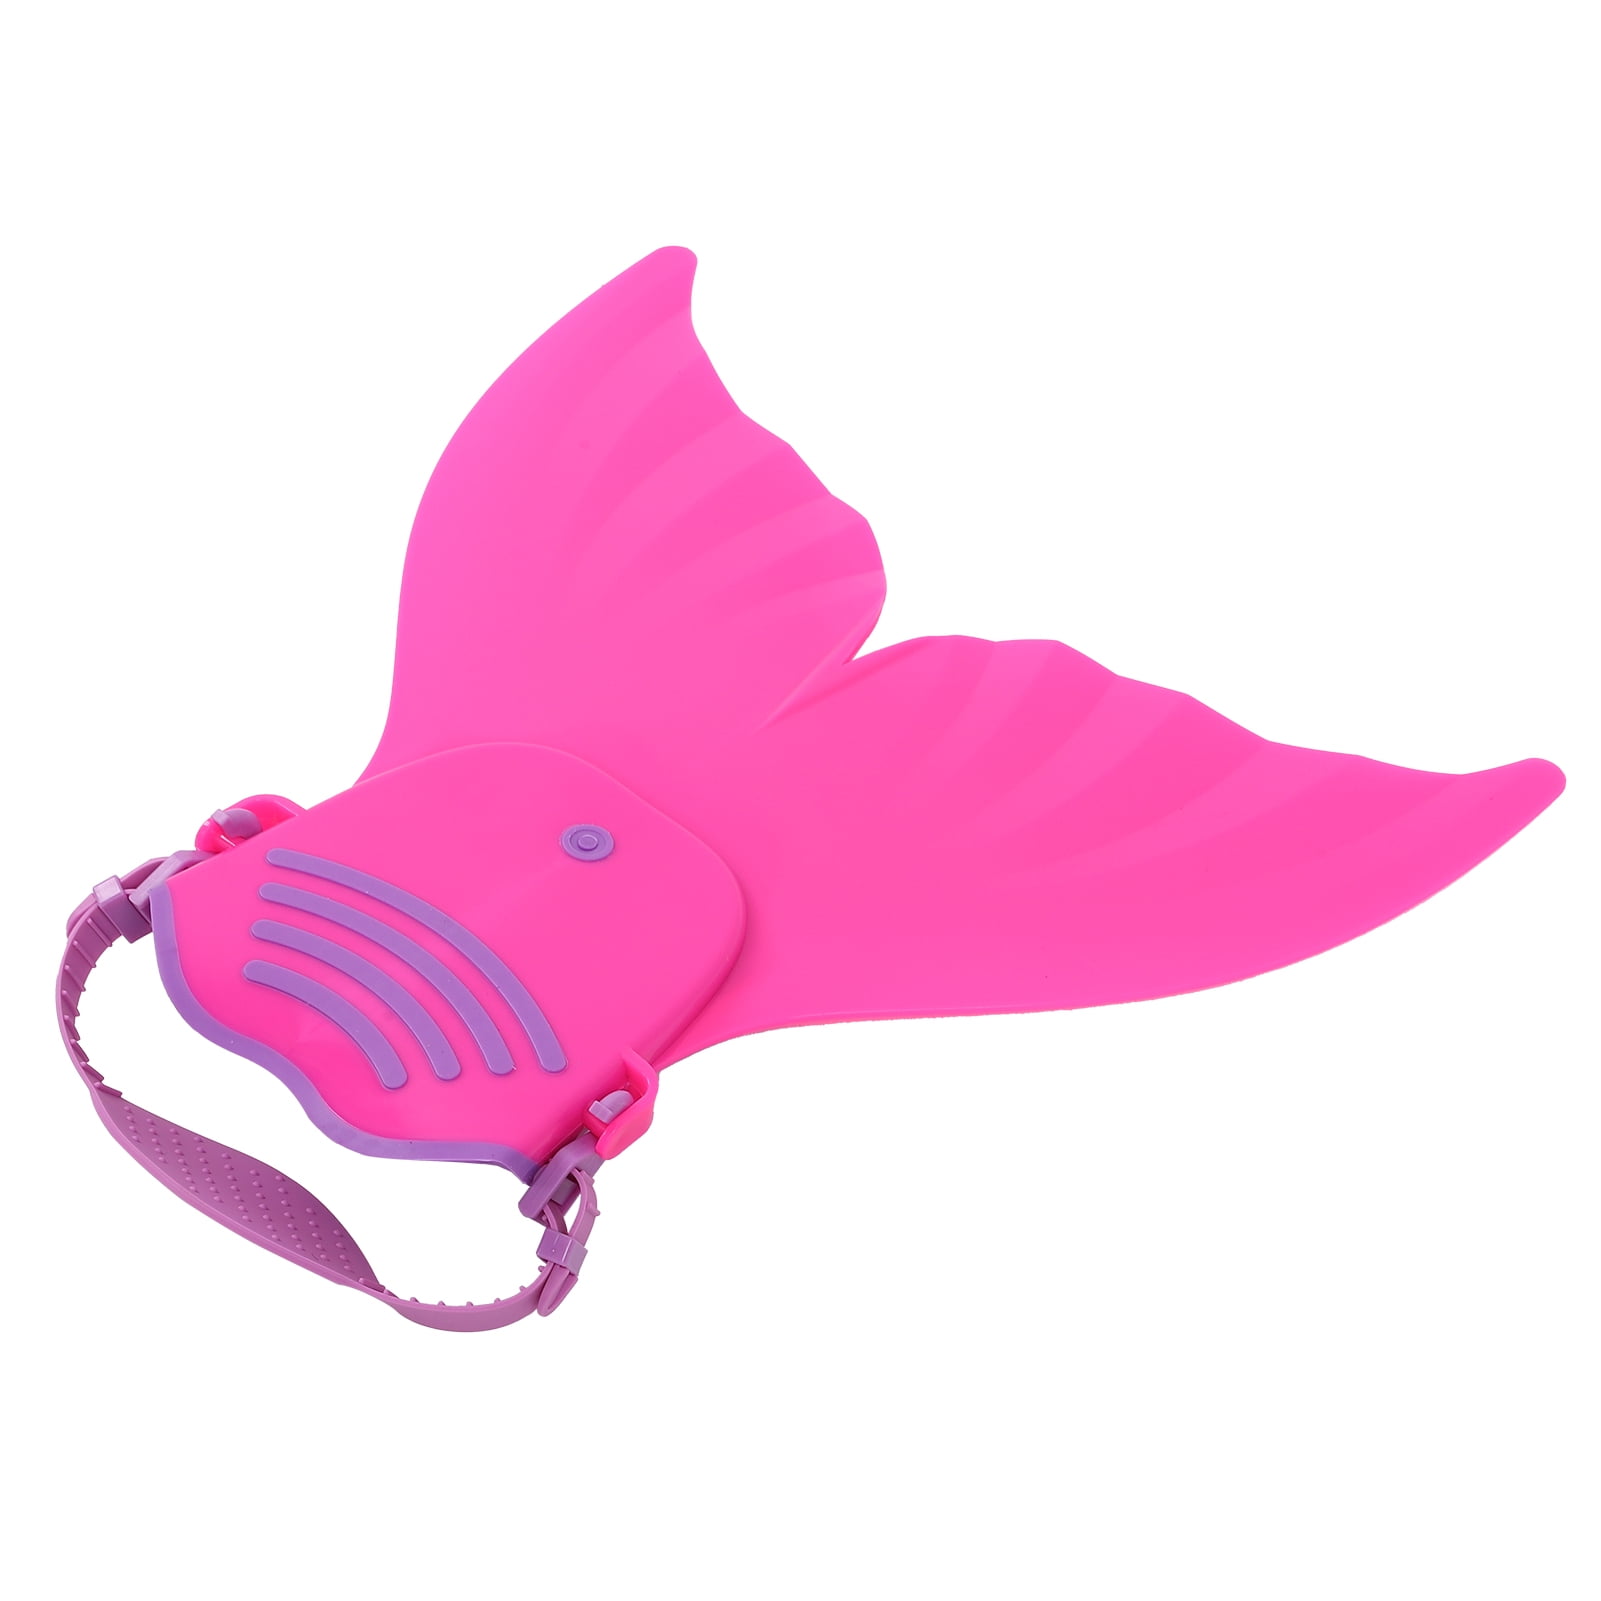 Diving Fins Swimming Mermaid Shape Flippers Fish Tail Fin Training Equipment Diving Accessory Swim Toy for Child 